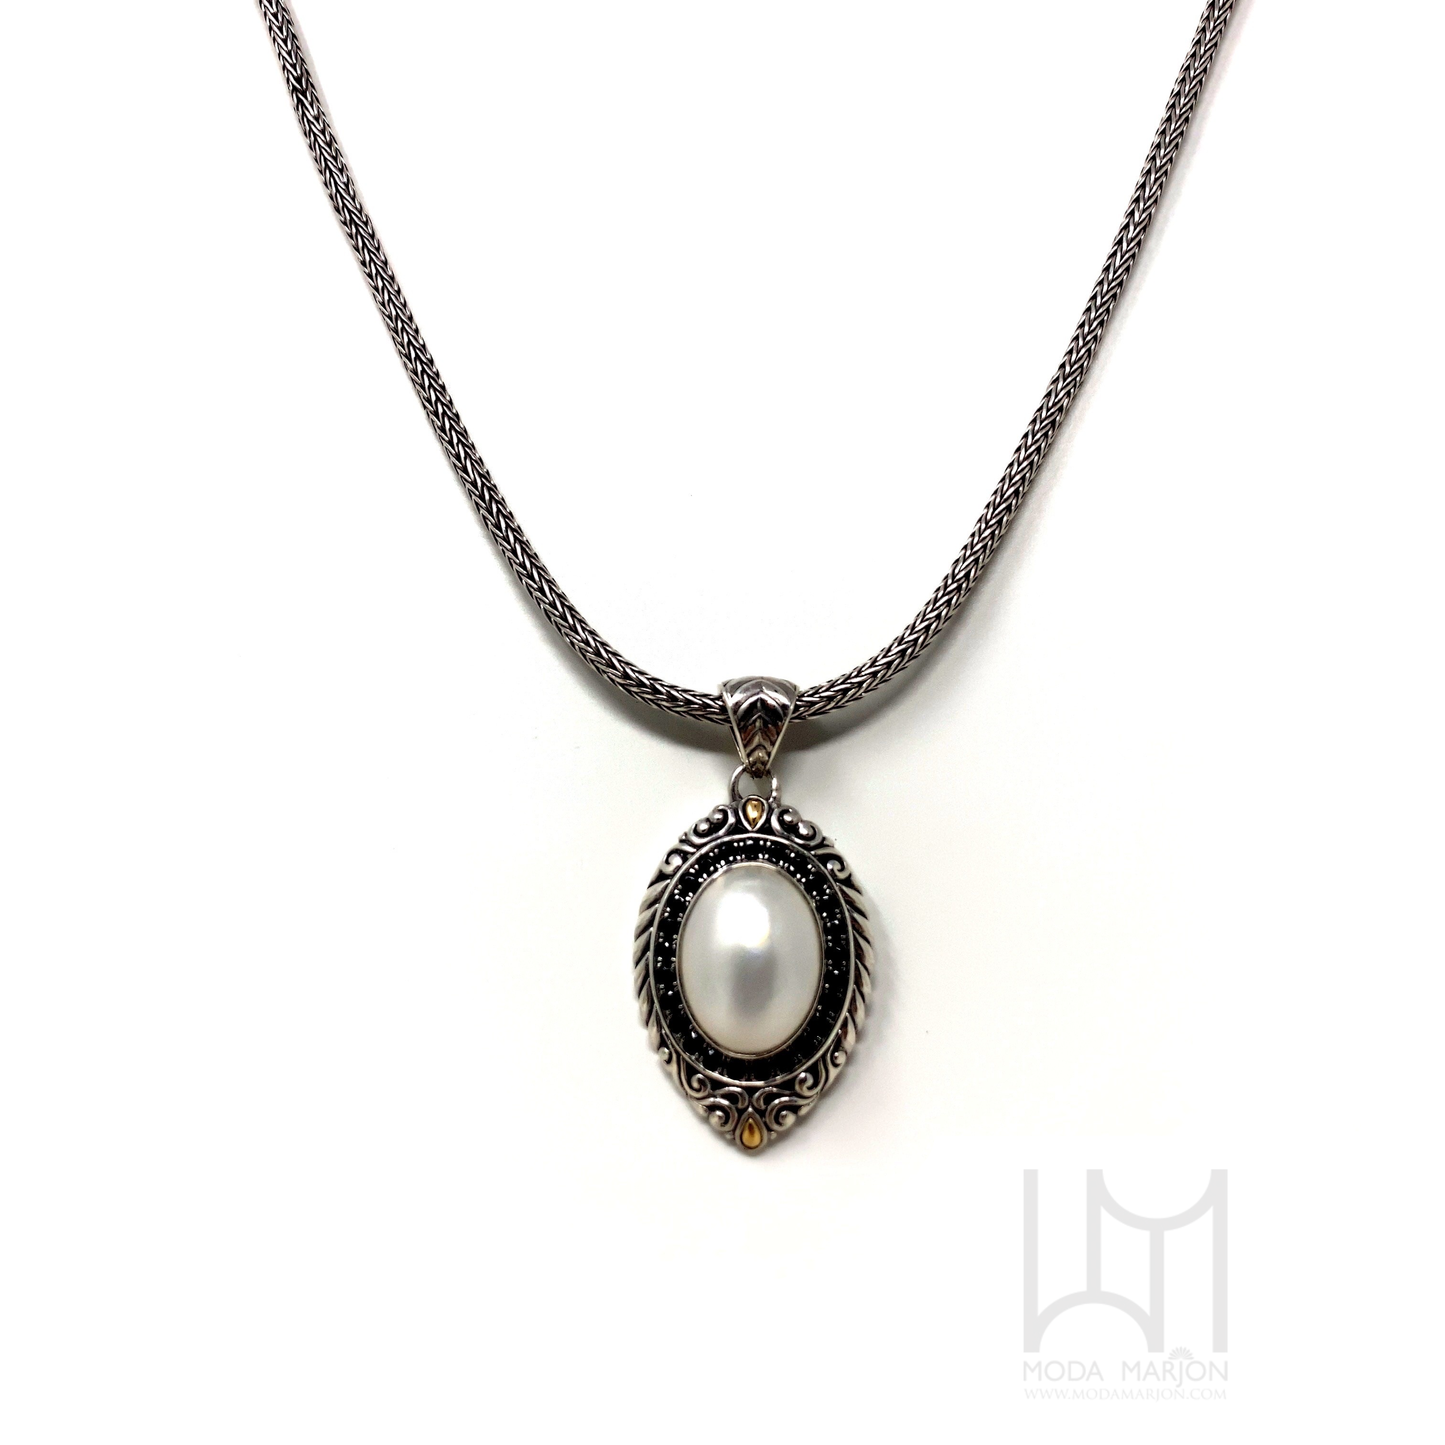 Mix Metal Mabe and Black Spinel Pendant